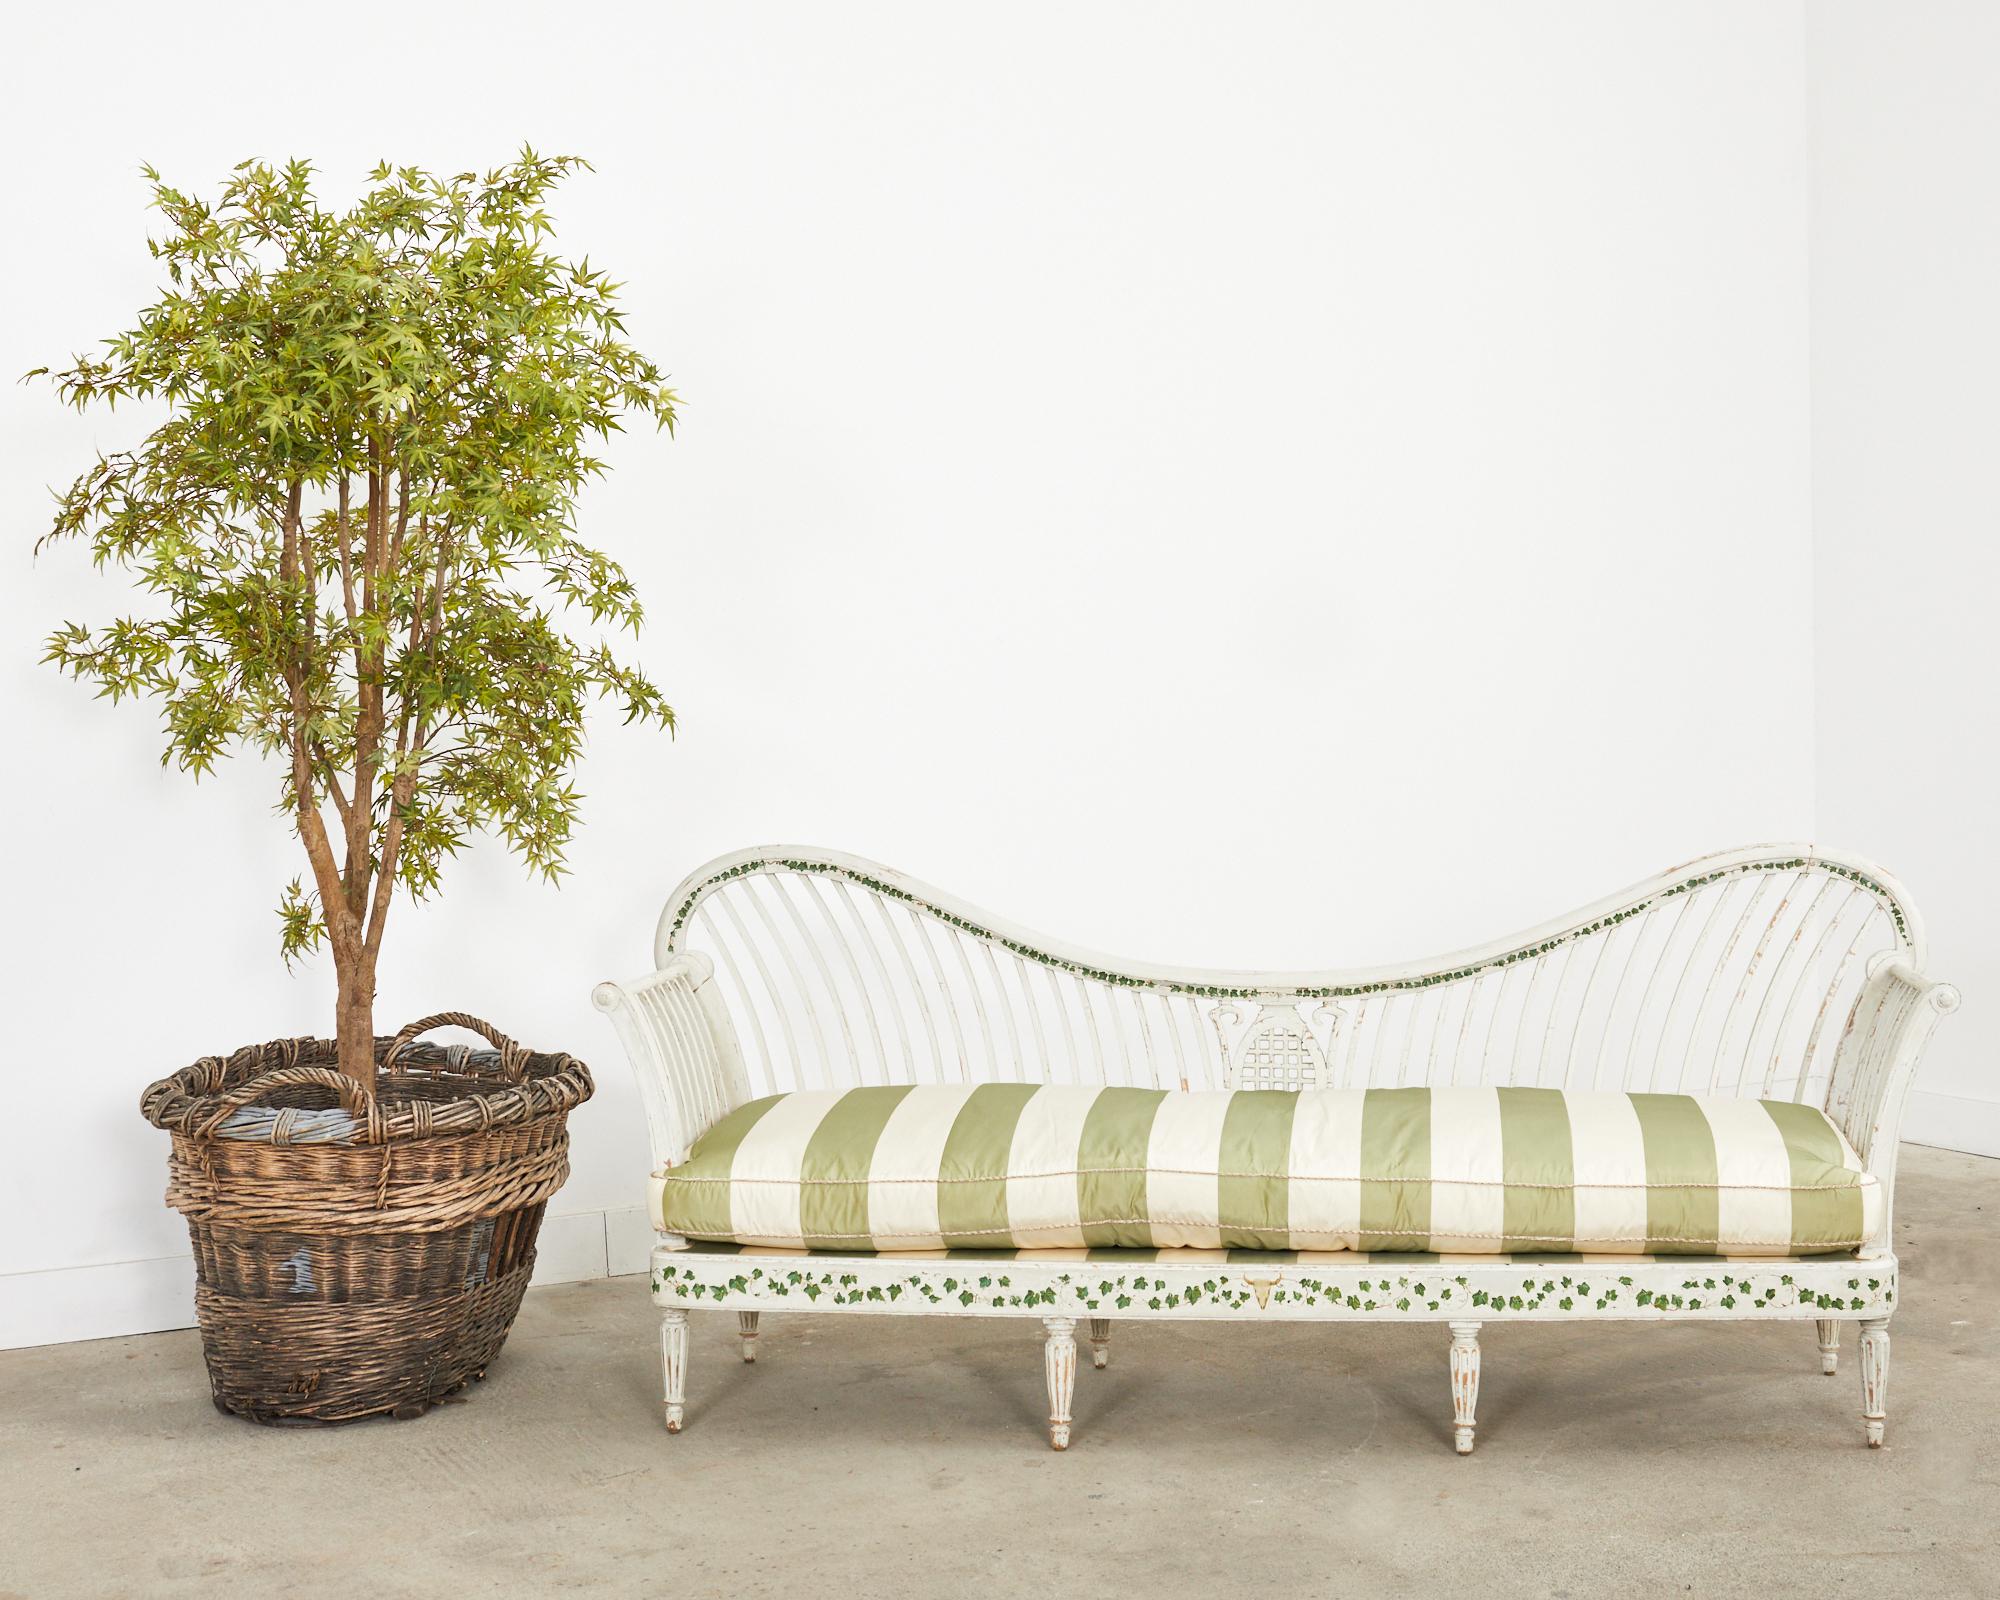 Grand Swedish painted pine daybed bench or settee made in the neoclassical taste. The pine frame features a gracefully curved back with spindles centered by a Greco-Roman urn form. Each side of the bench has scrolled arms. The piece is decorated